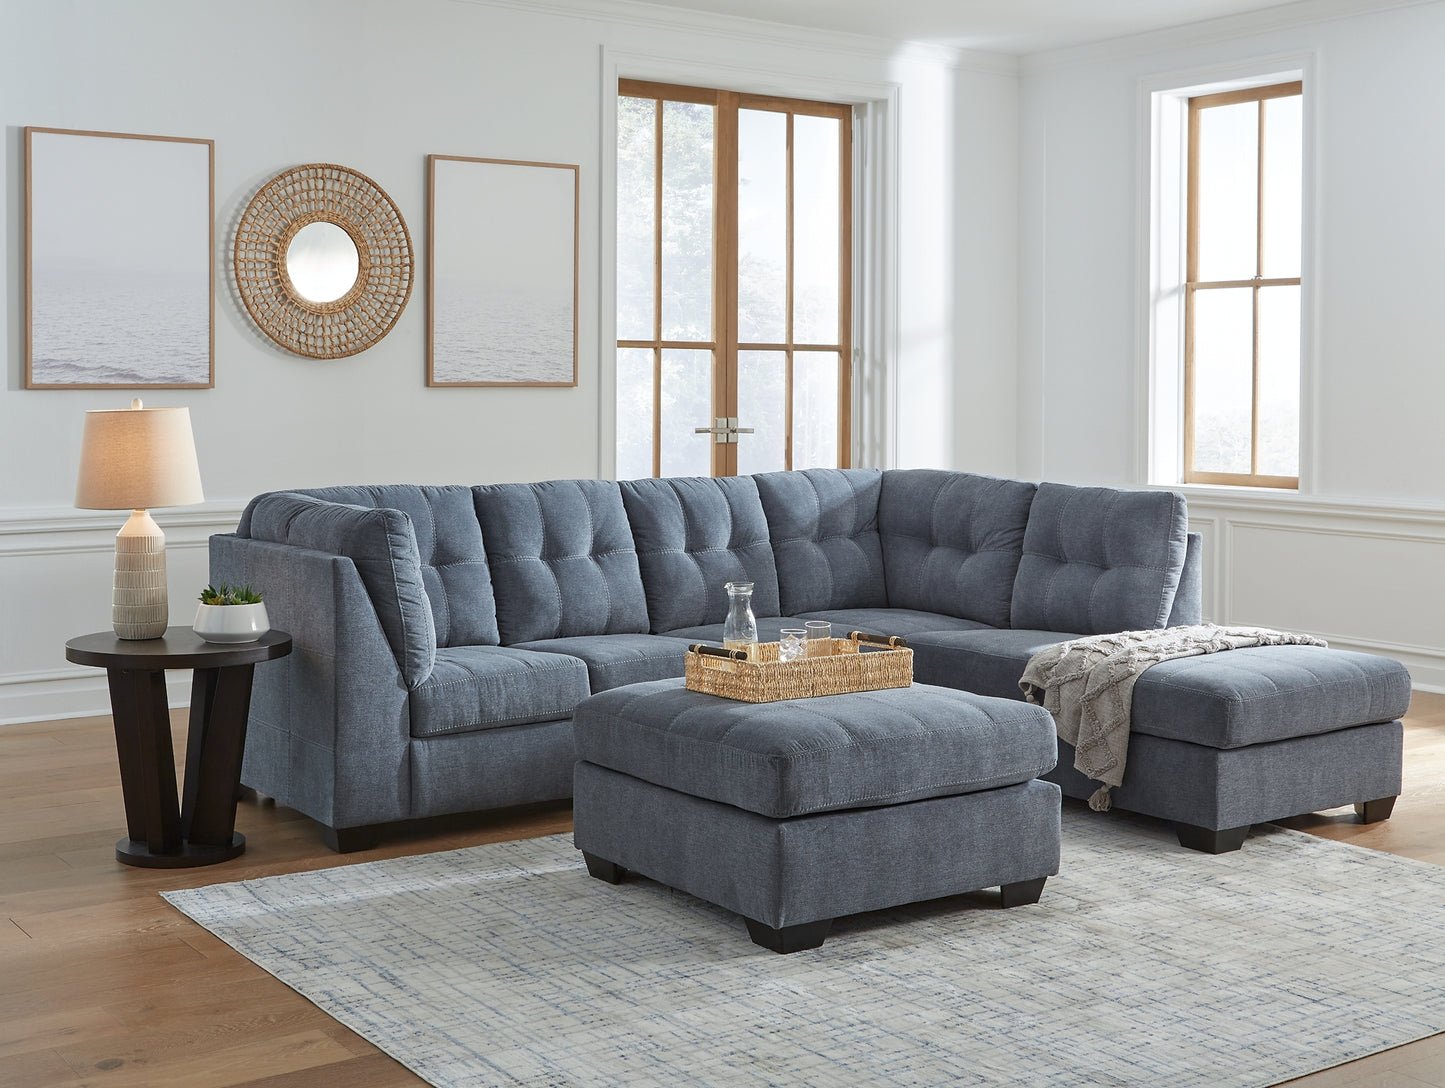 Marleton 2-Piece Sleeper Sectional with Ottoman Signature Design by Ashley®